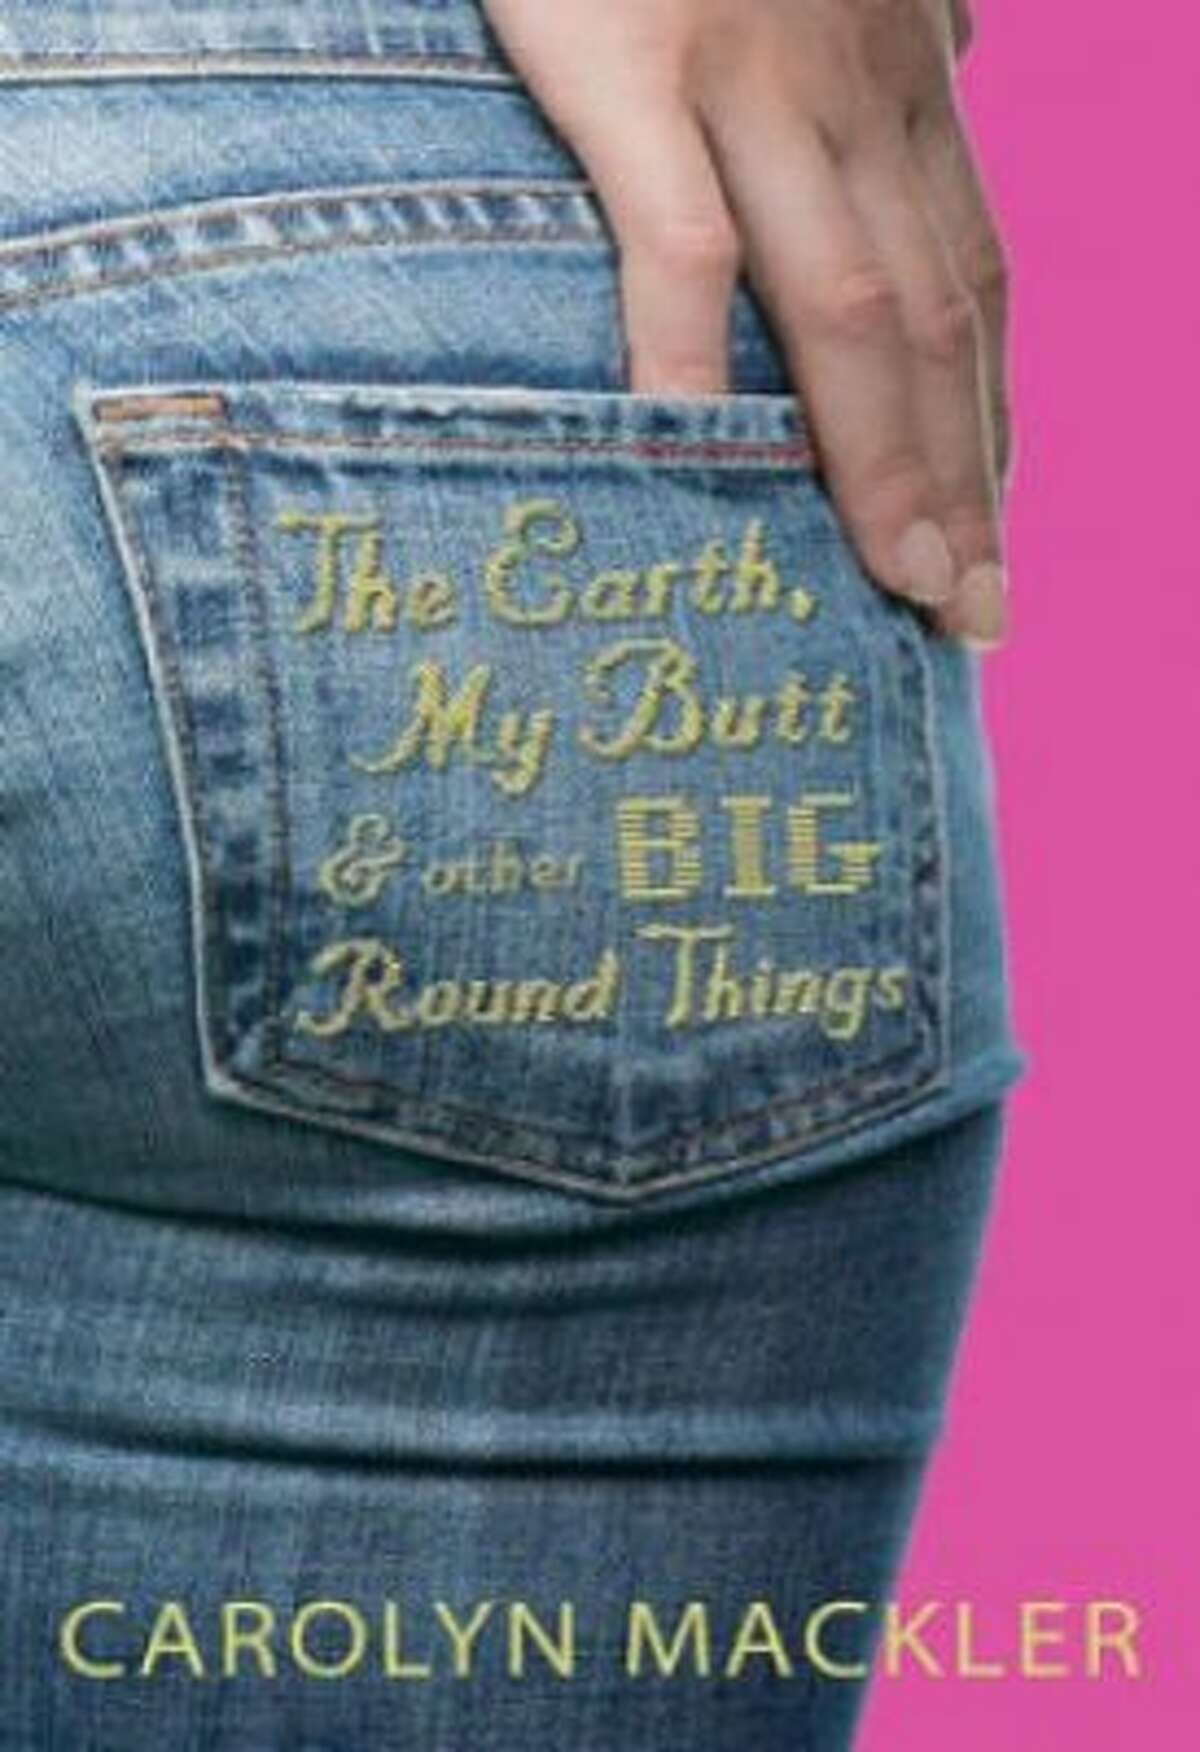 The Earth, My Butt, and Other Big Round Things by Carolyn Mackler